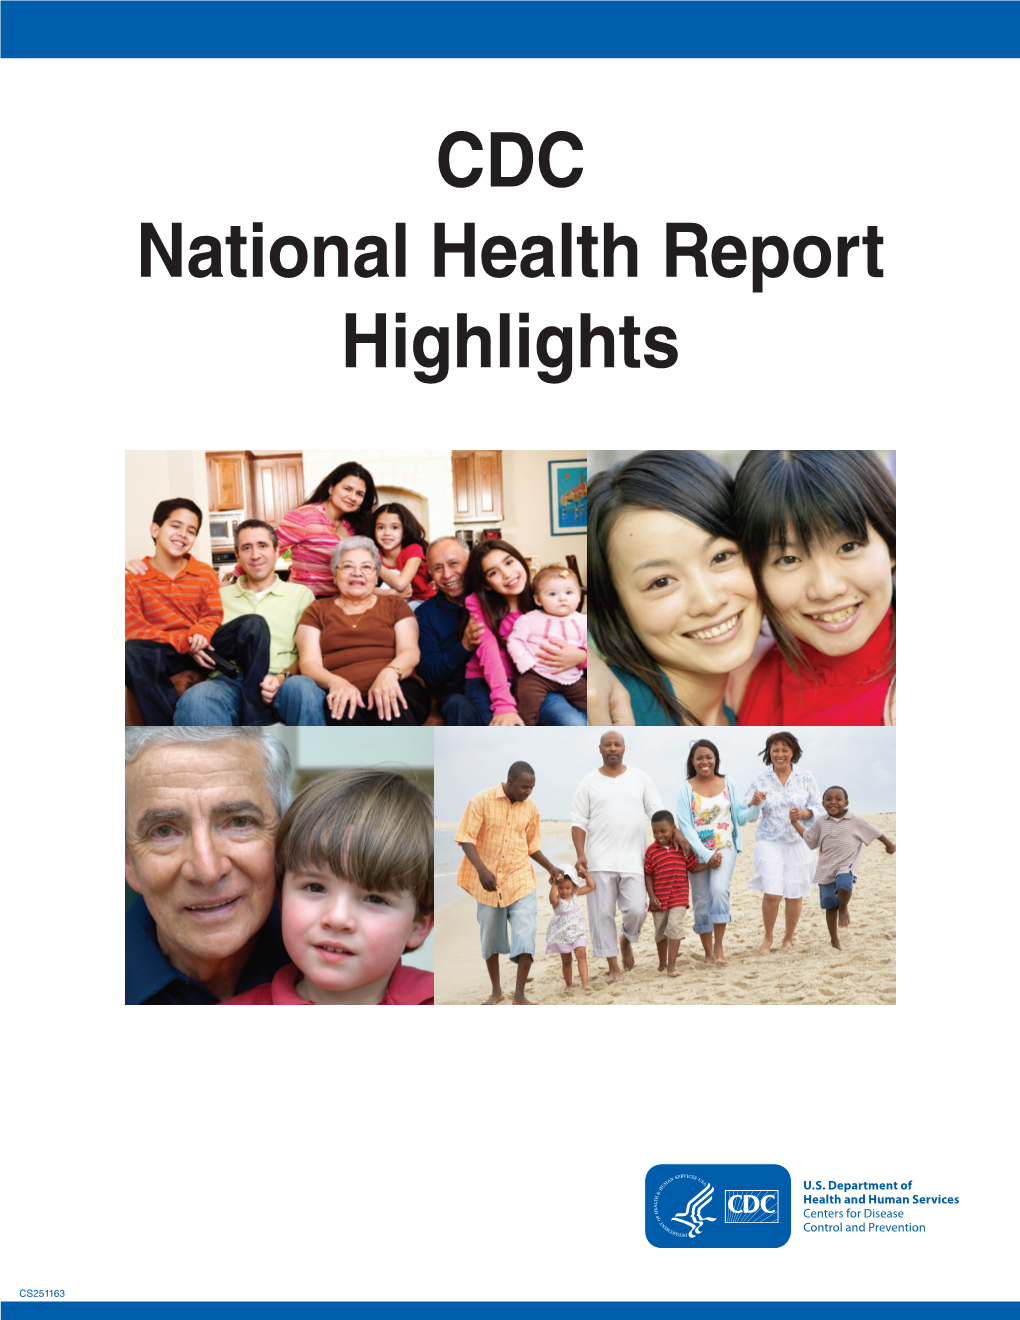 CDC National Health Report Highlights